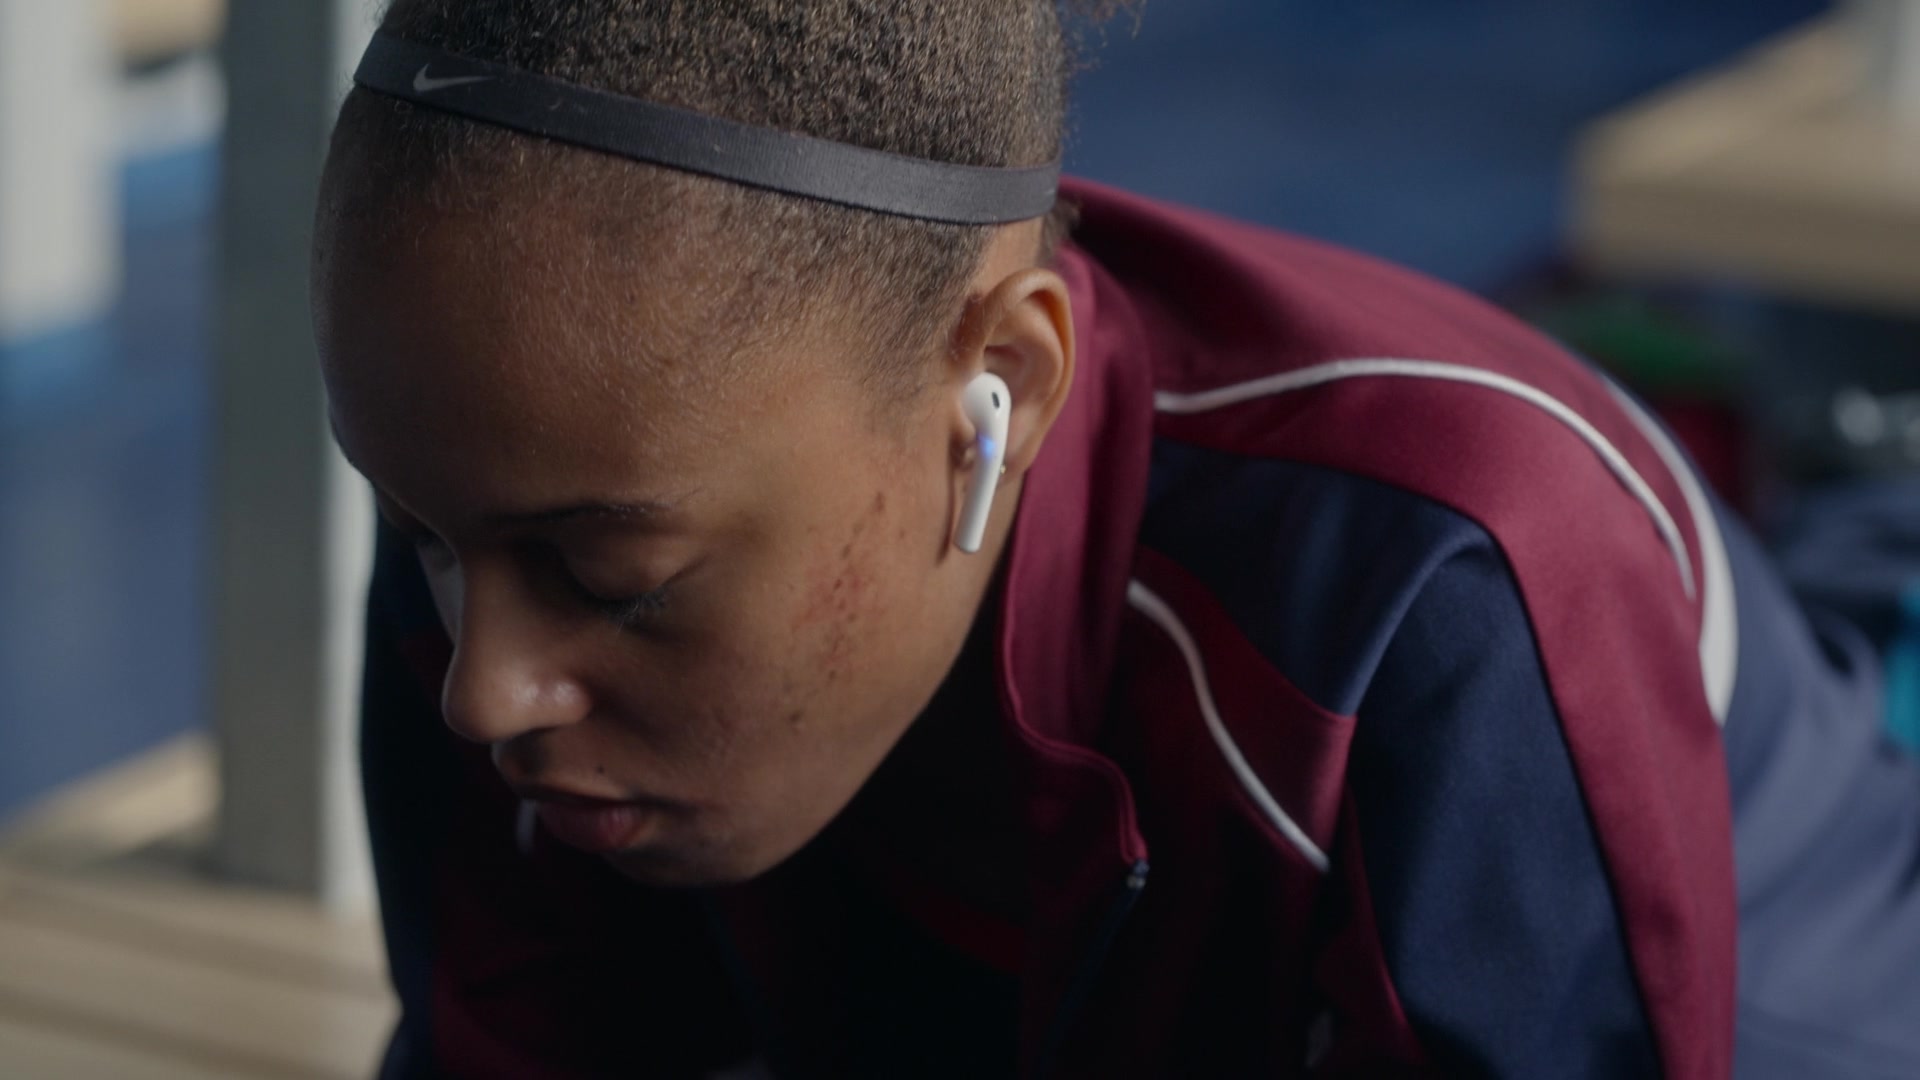 Legibilidad entrega Inactivo Nike Skinny Headband Of Reign Edwards As Rachel Reid In The Wilds S01E02  "Day Two" (2020)